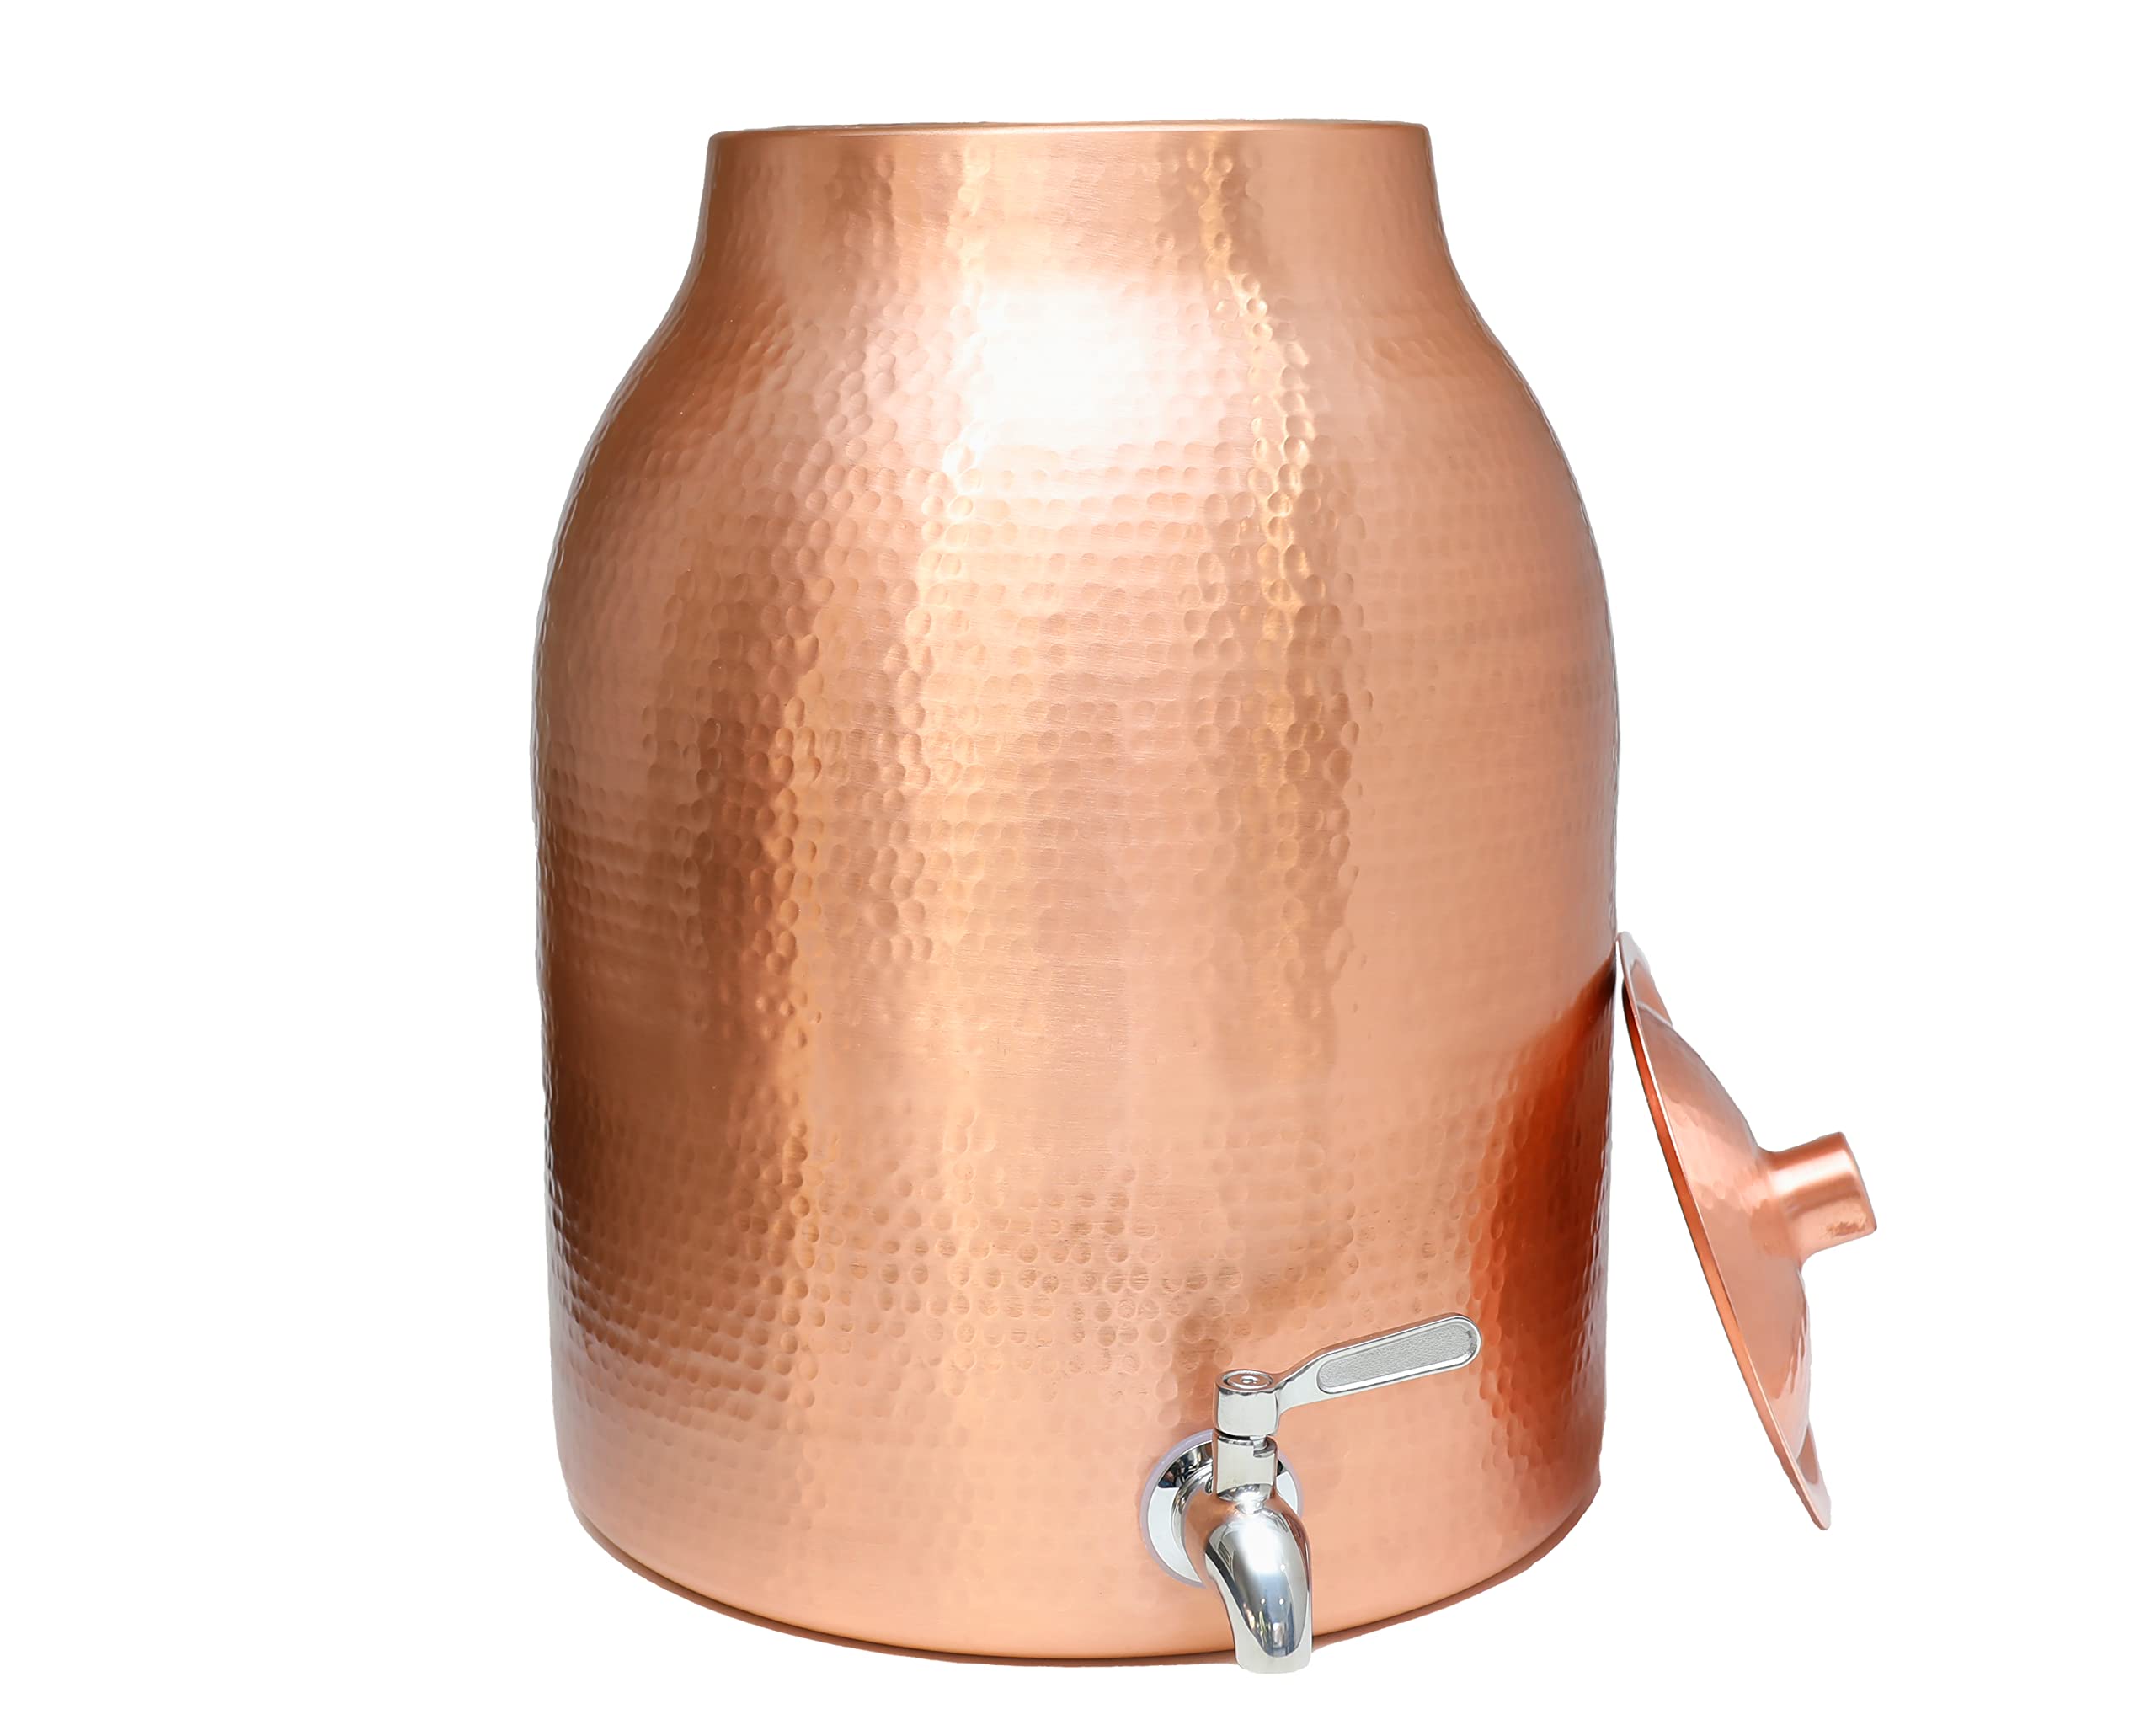 Pure Copper Water Dispenser with Lid by Copper Mules | XL Capacity Holds 3.5gal or 16liters | RAW Copper Interior for Ayruvedic Health | Includes No-leak Stainless Steel Spigot